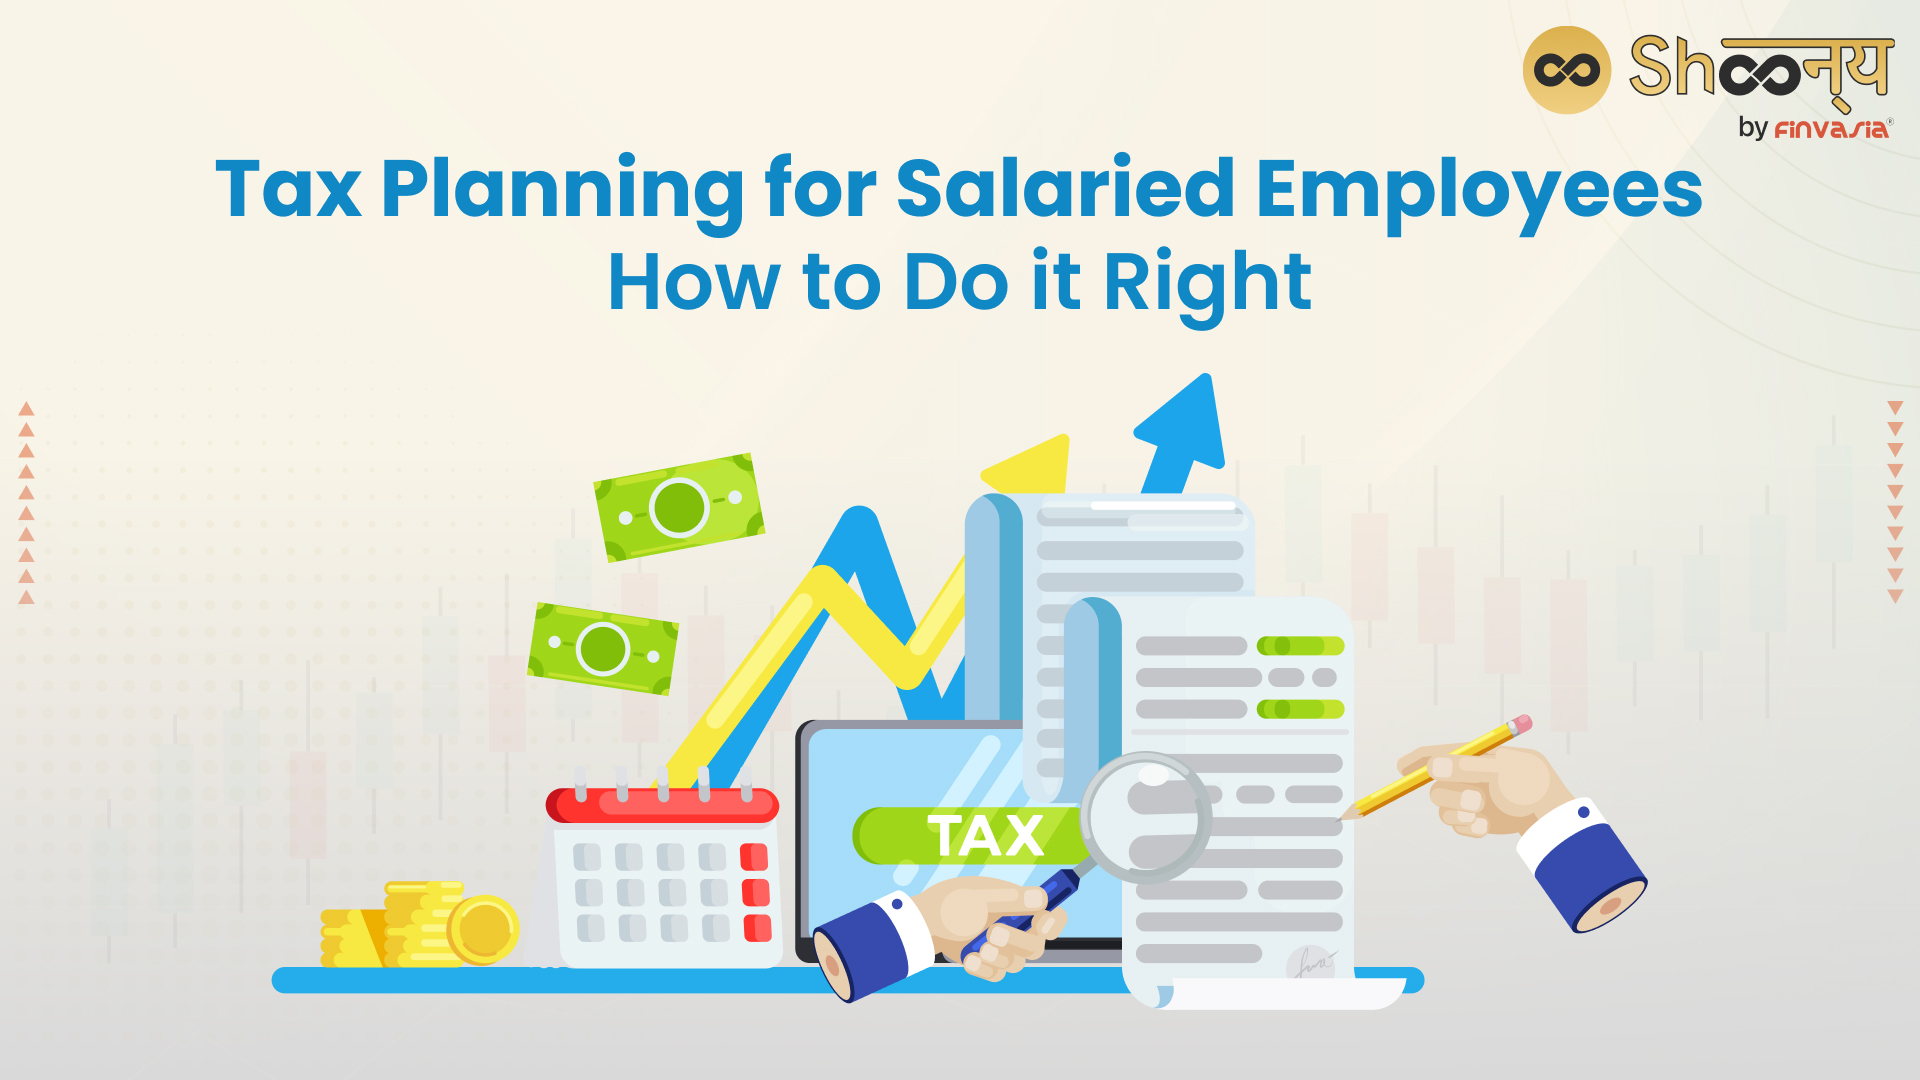 Tax Planning for Salaried Employees: Methods & Benefits